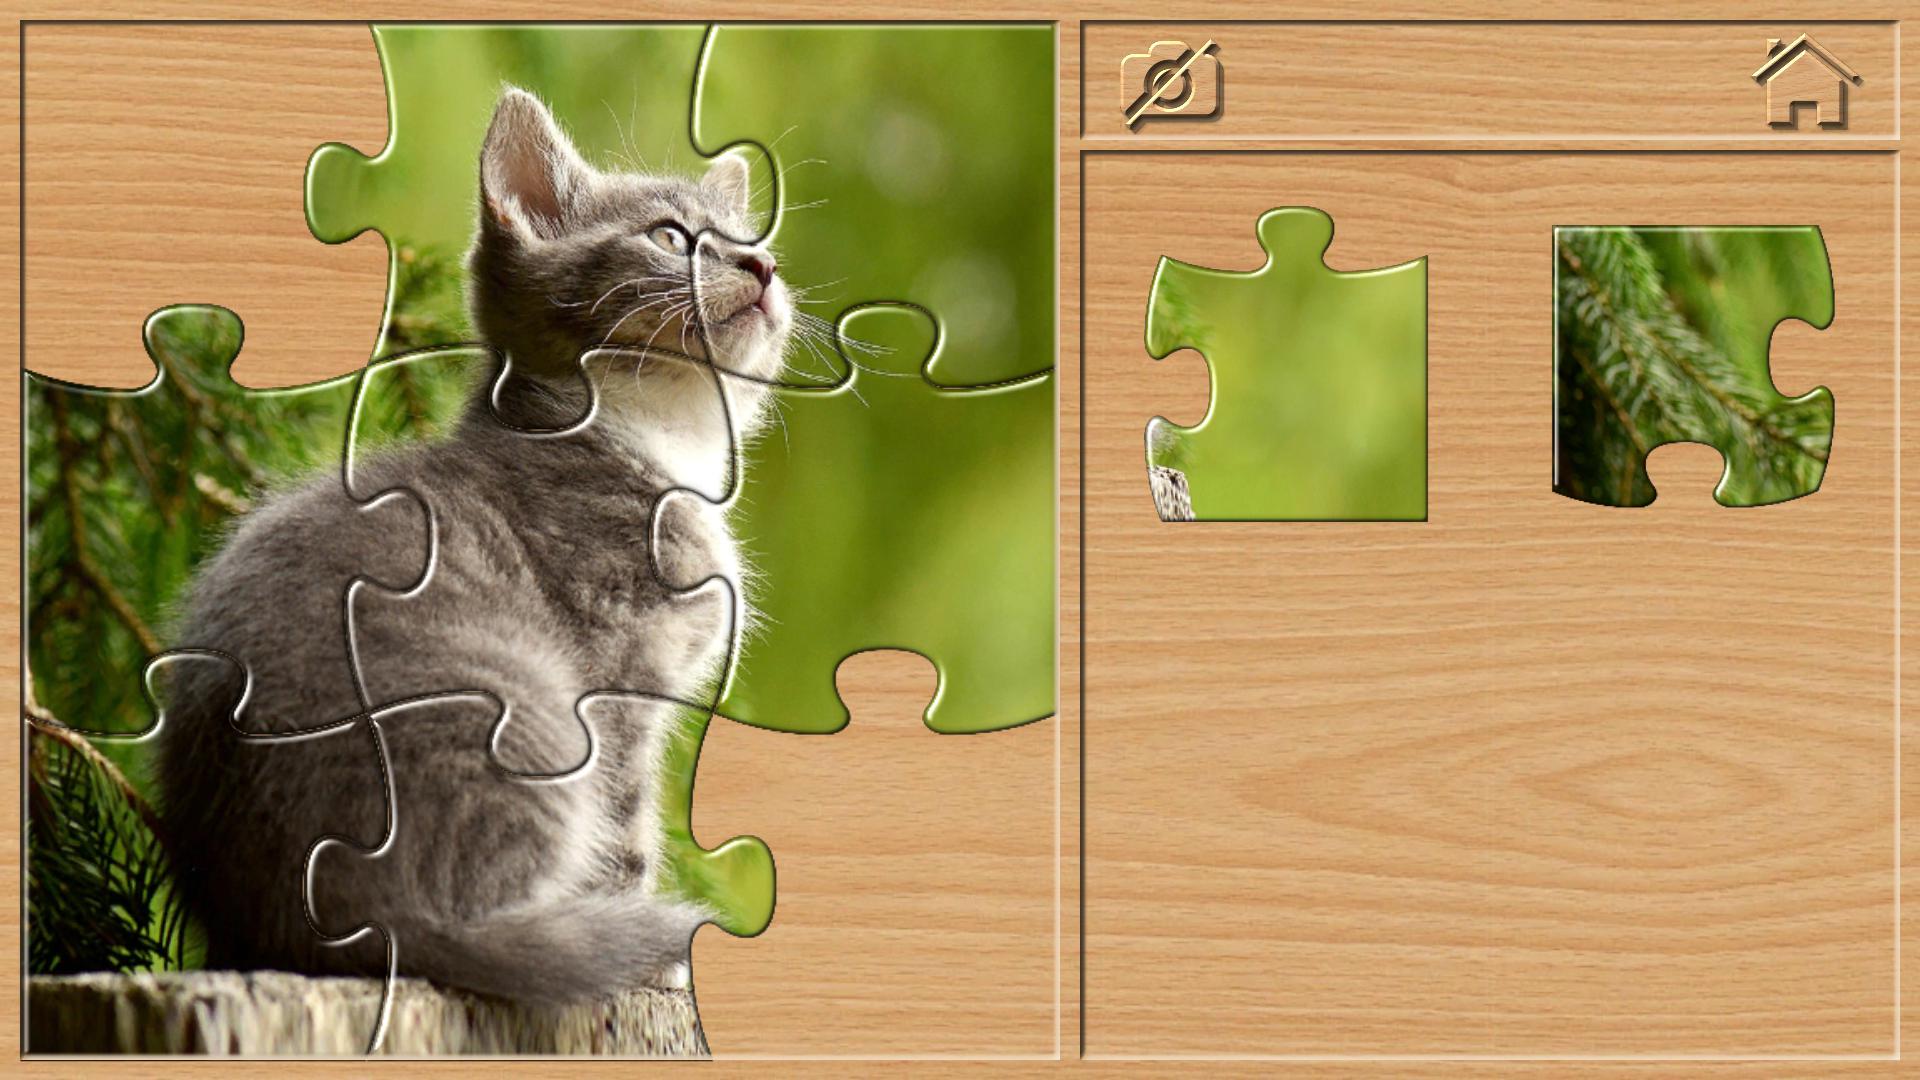 Animal Sounds - Jigsaw Puzzles for Kids._截图_4